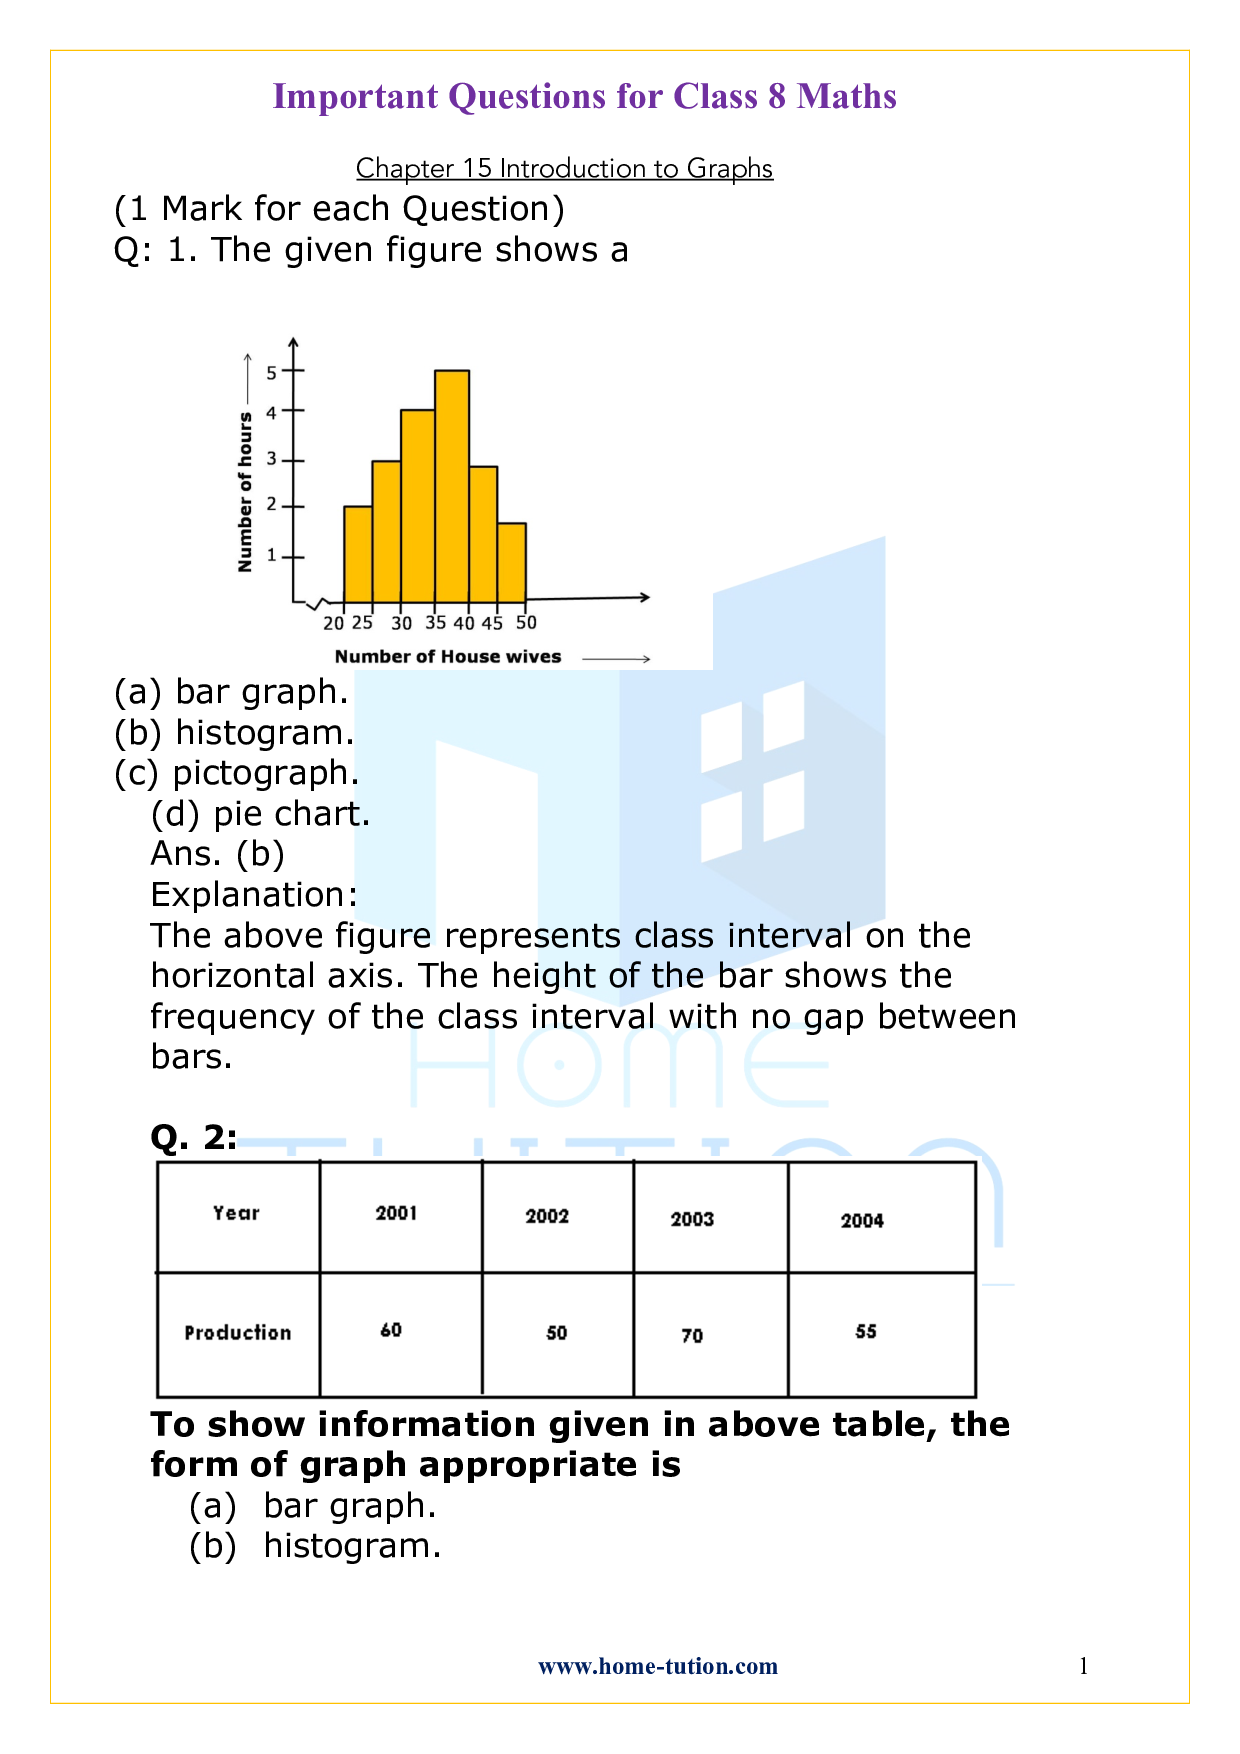 Important Questions for Chapter 15-Introduction to Graphs